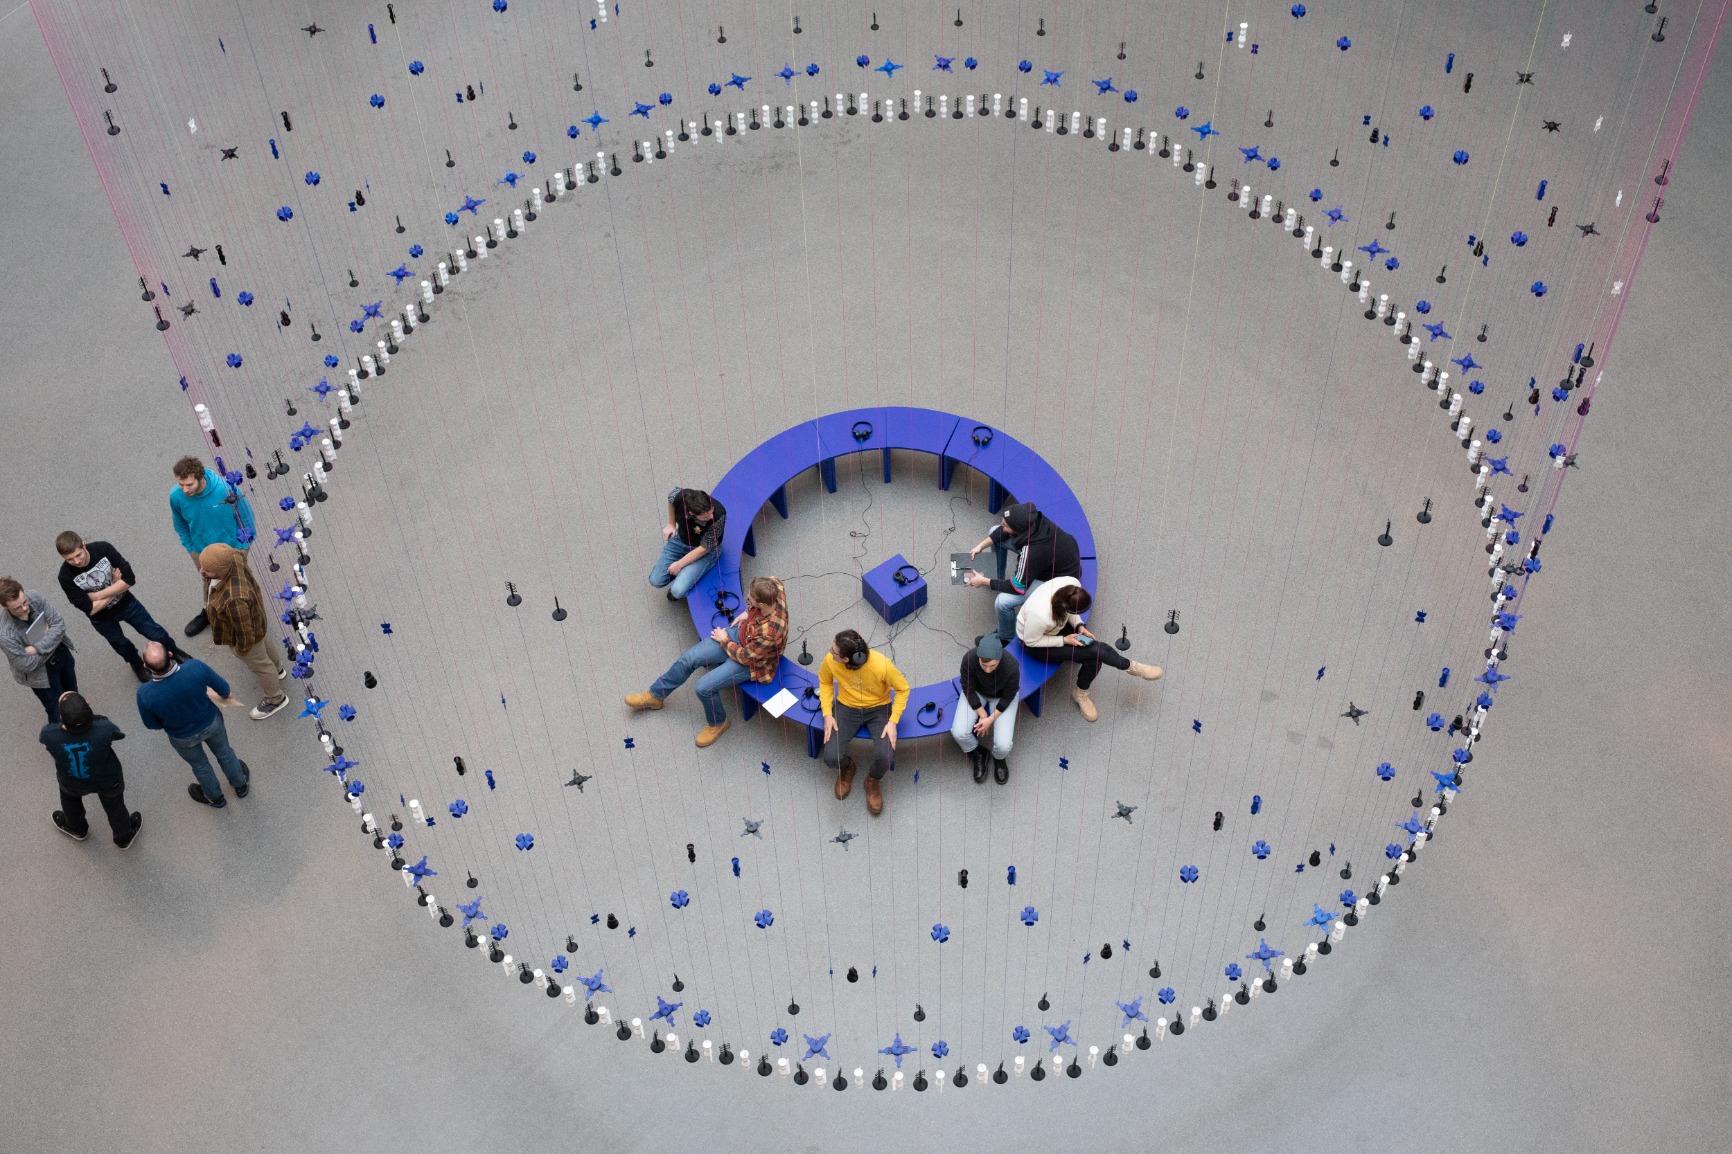 Photo of artwork. Artwork is a transparent beaded hanging curtain of 16m in a circular form creating an interior. The interior has blue benches that when put together form a circle. The curtain beads are blue, white and black. The strings are blue and pink. There are people sitting on the bench listening with earphones to a soundscape. There are people standing outside of the curtain. The image is taken from above. 